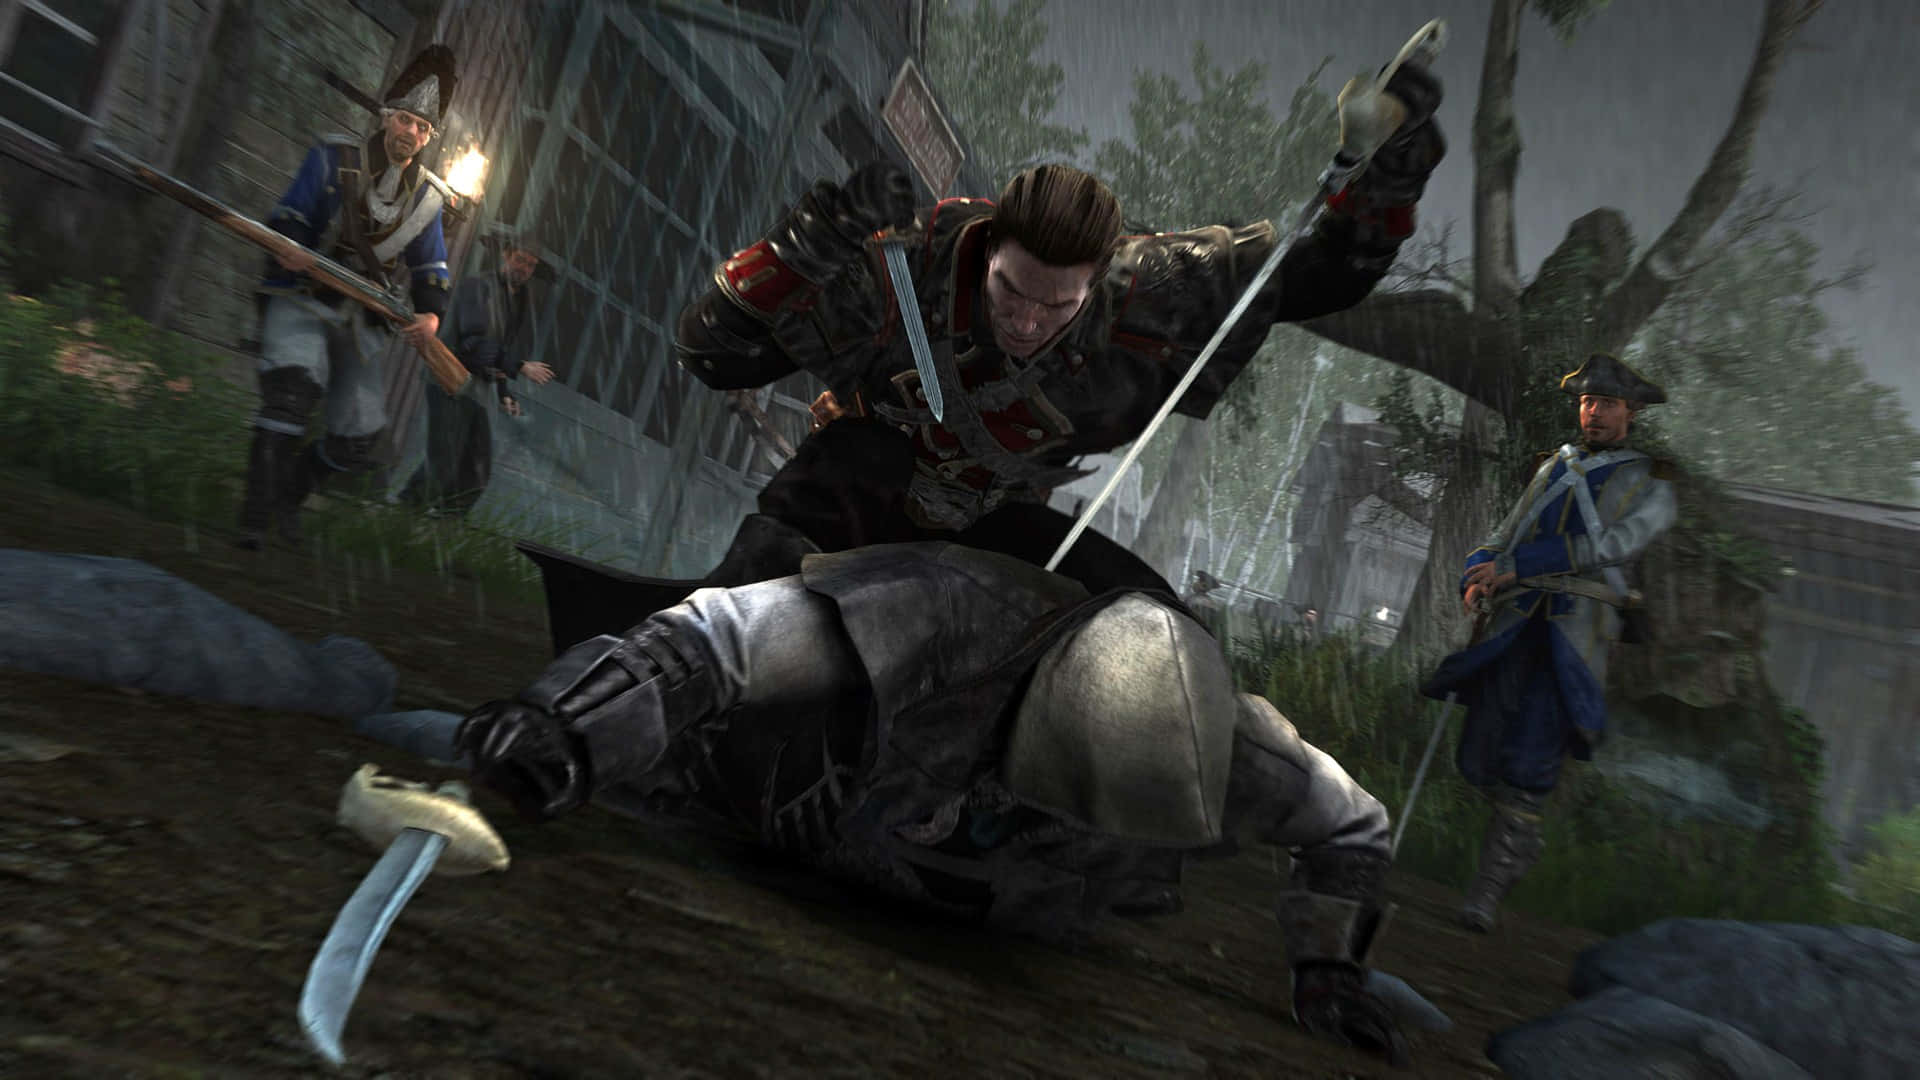 Shay Cormac, the fearless Assassin-turned-Templar in action Wallpaper